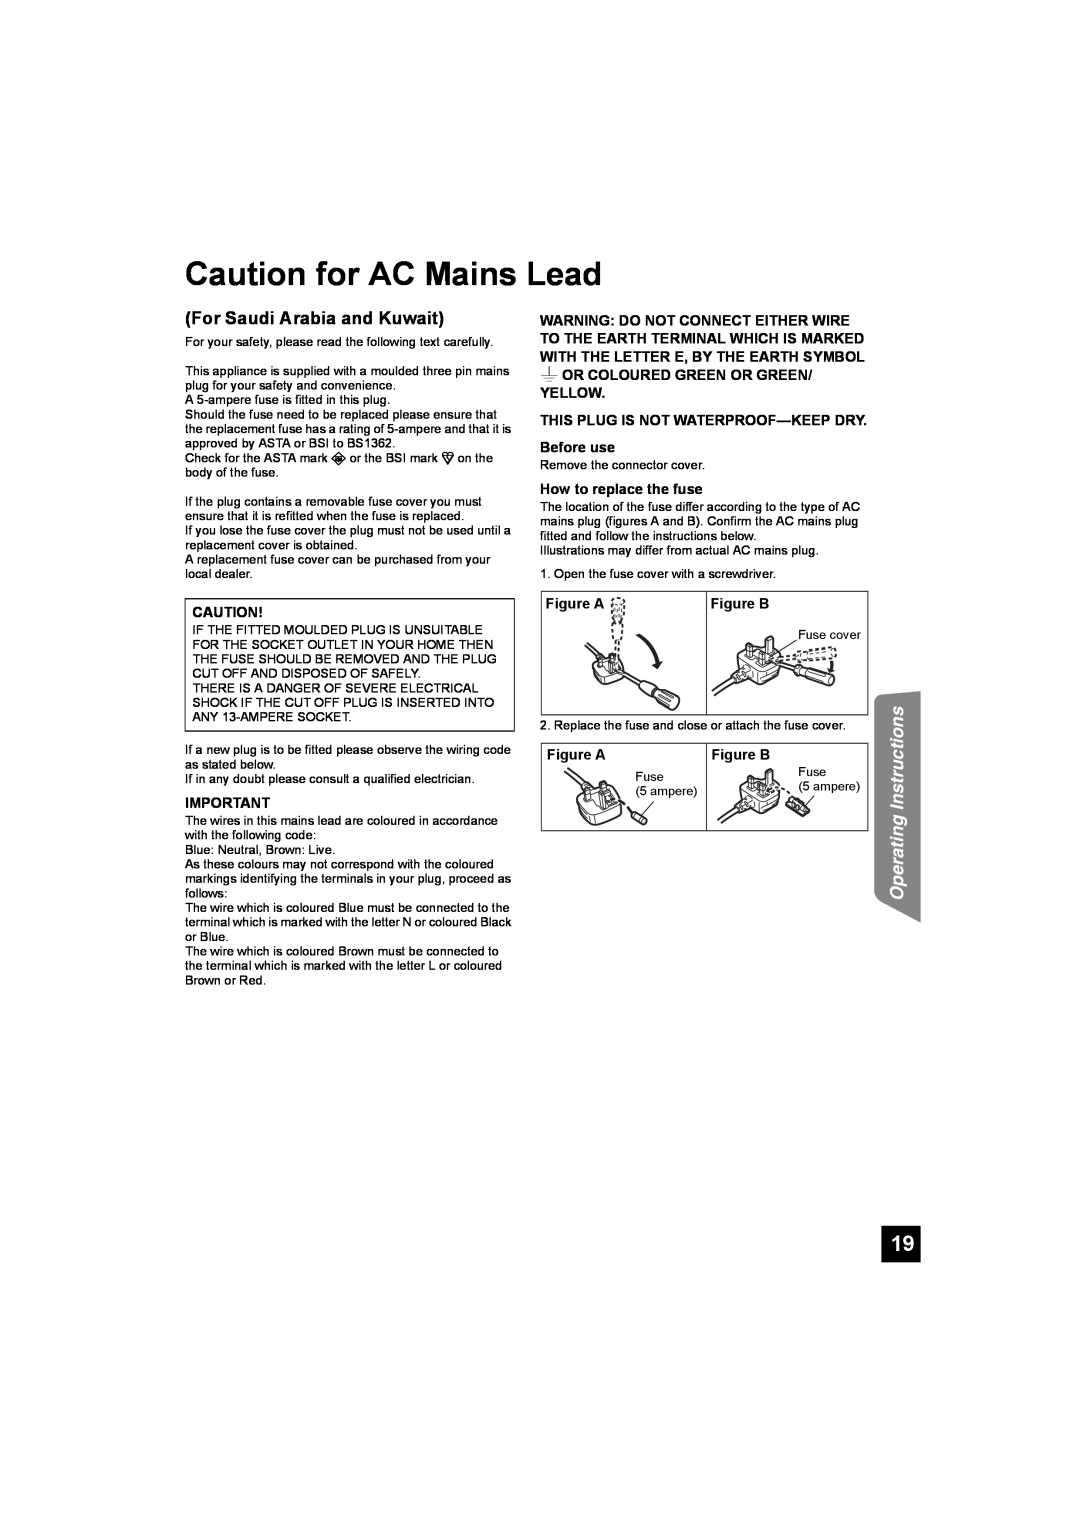 Panasonic SC-HTB10 operating instructions Caution for AC Mains Lead, For Saudi Arabia and Kuwait, Operating Instructions 